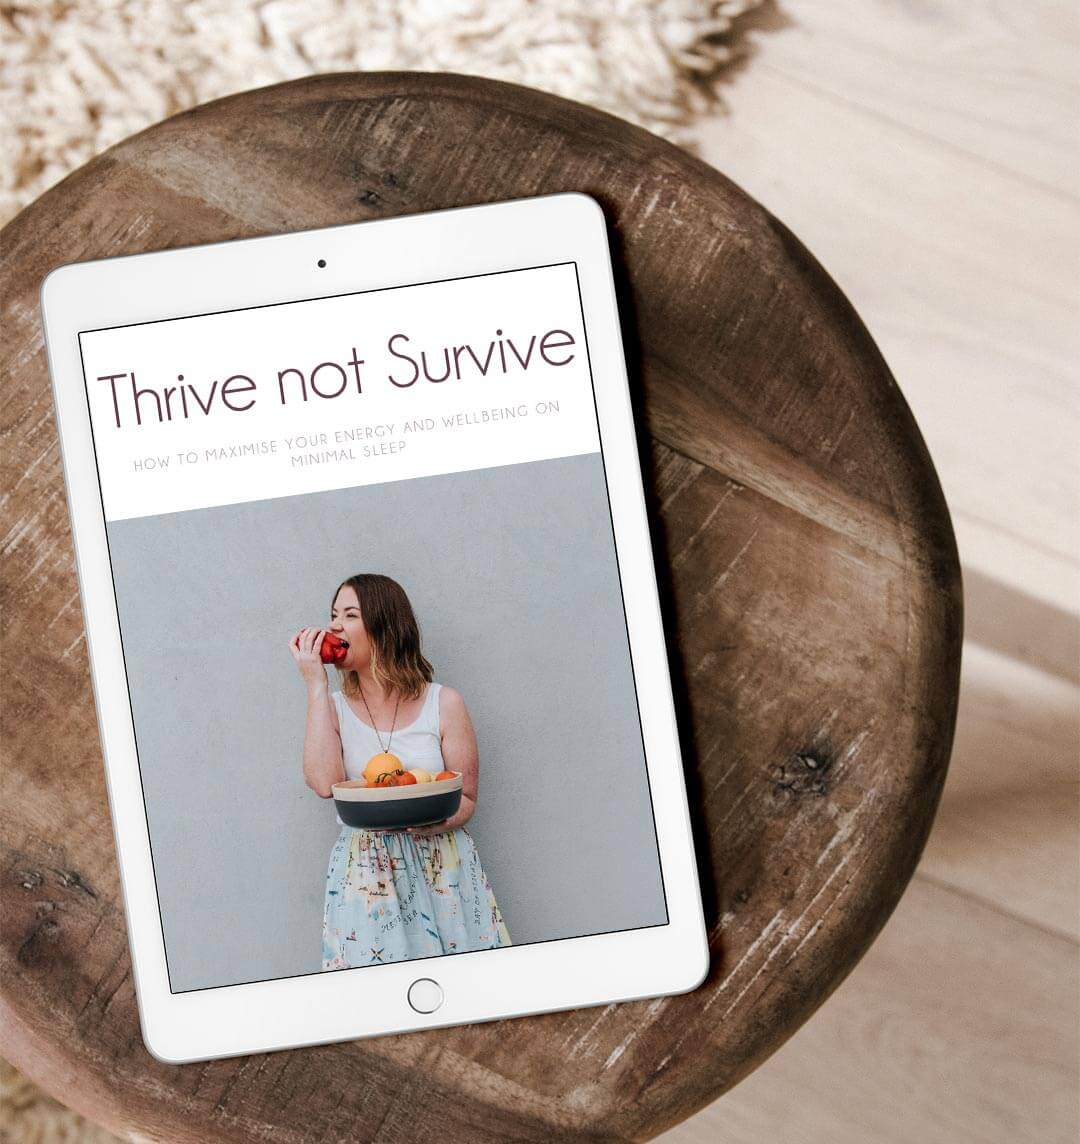 Thrive not survive ebook image